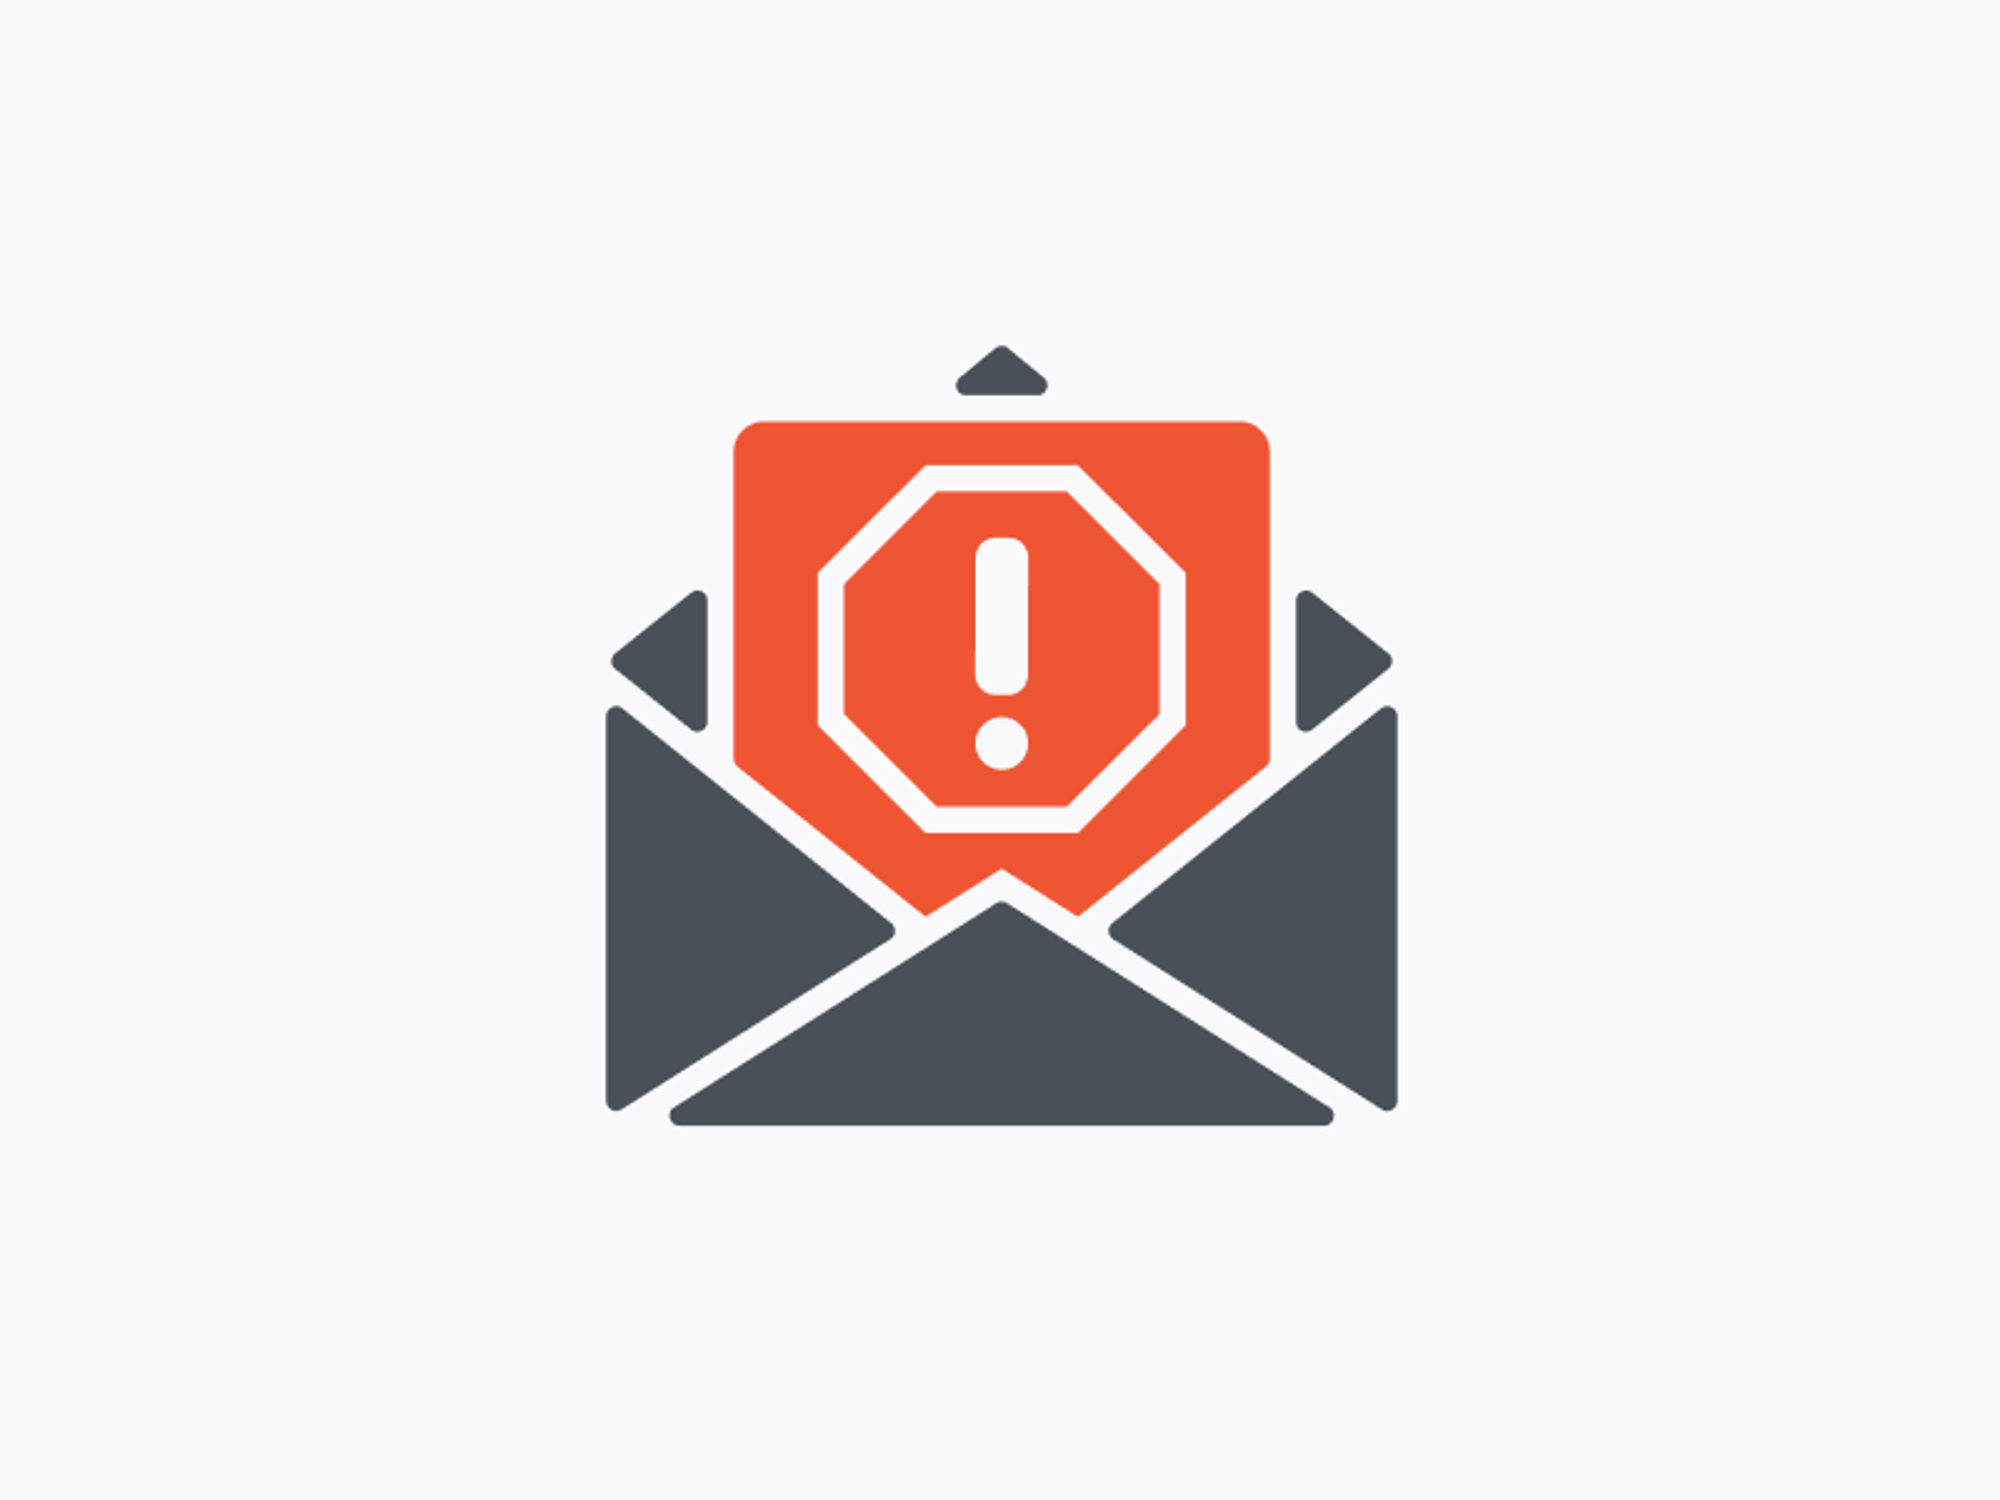 If you receive suspicious messages or emails that may contain malware or phishing sites, delete them immediately without opening them
